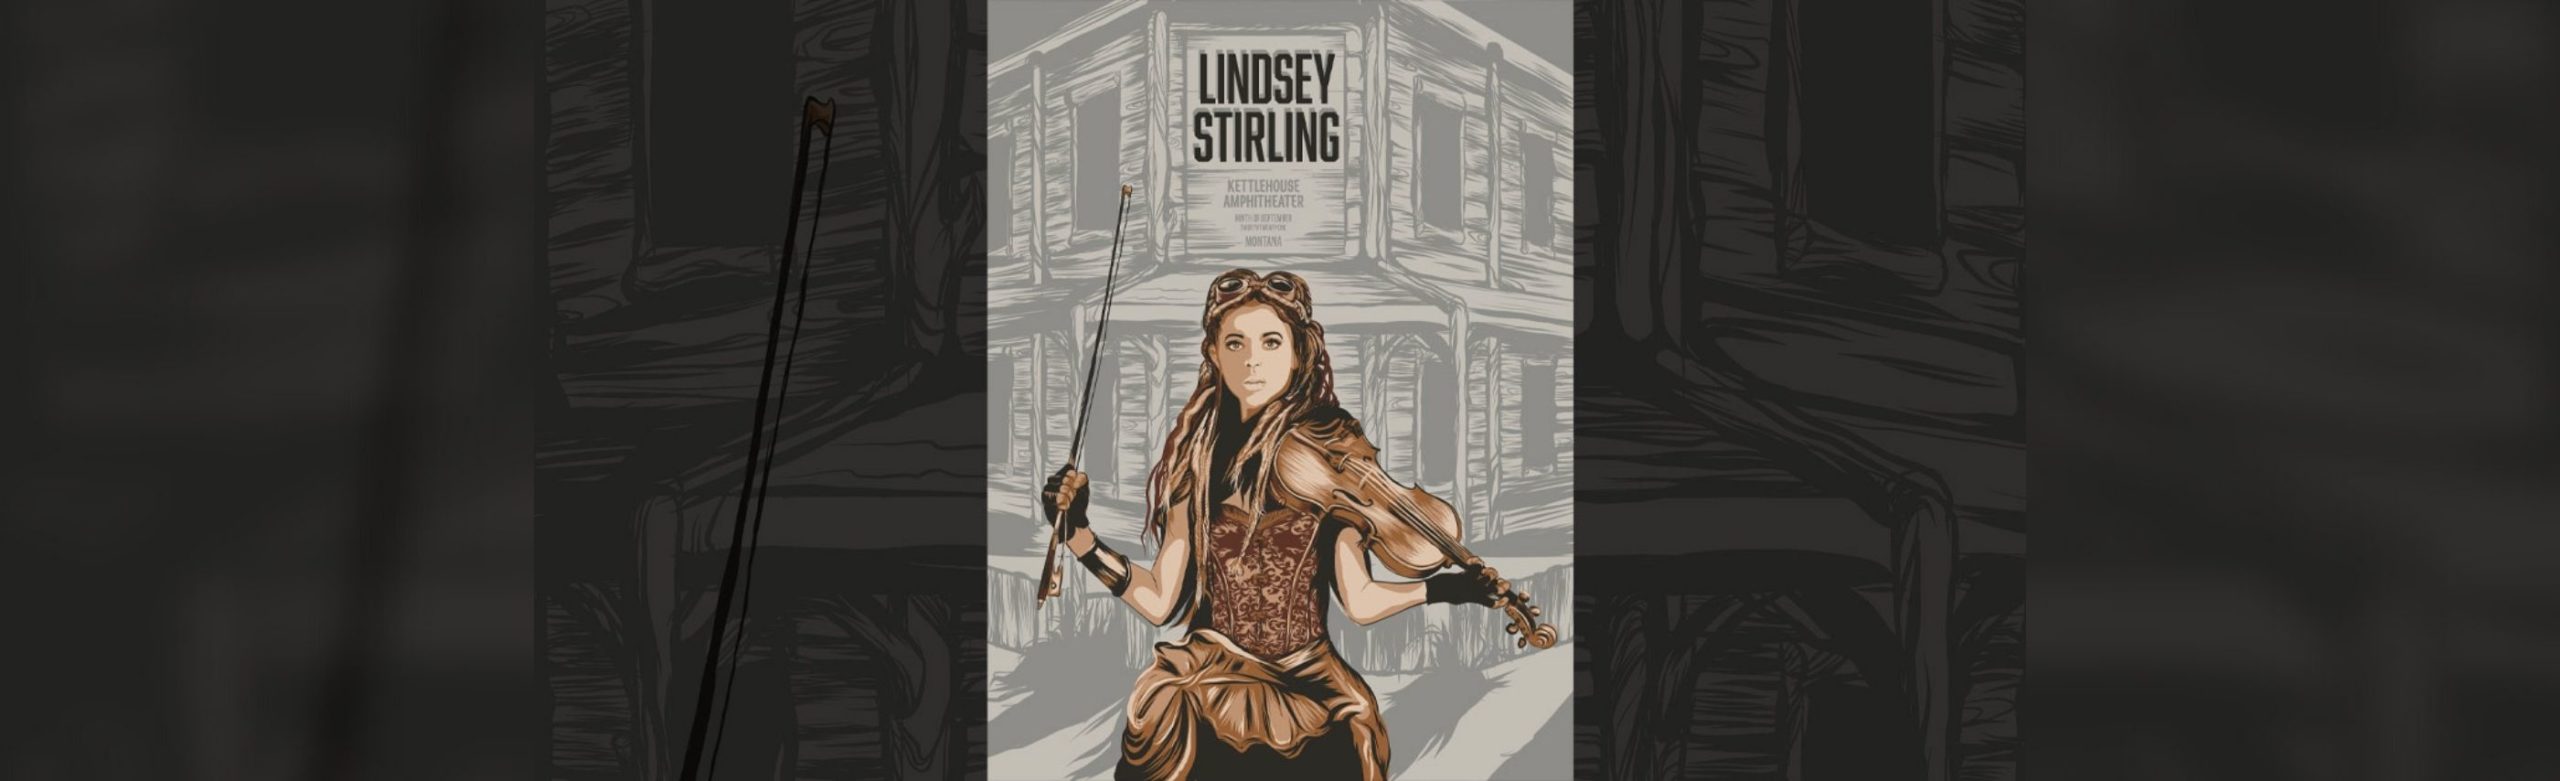 Limited Edition Screenprint for Lindsey Stirling at KettleHouse Amphitheater 2021 Image